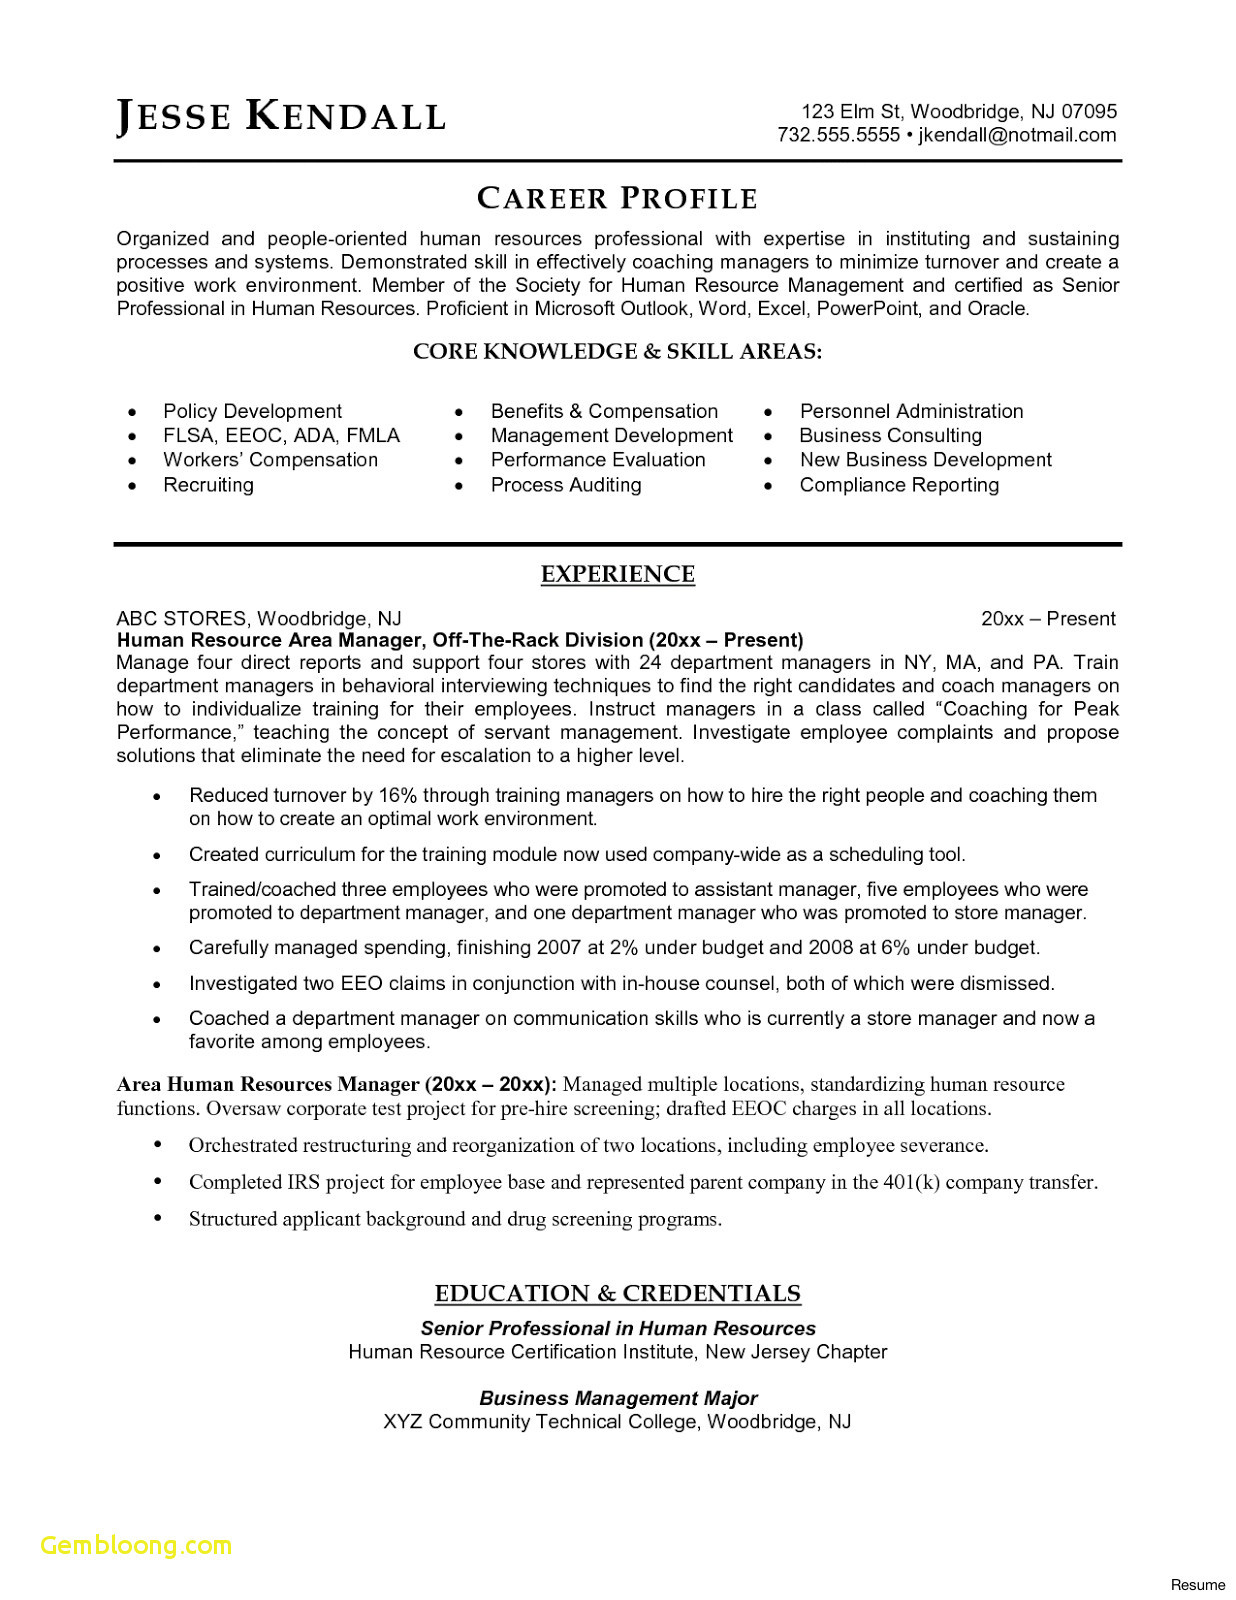 Microsoft Word Cover Letter Template - Updated Job Resume Template Microsoft Word